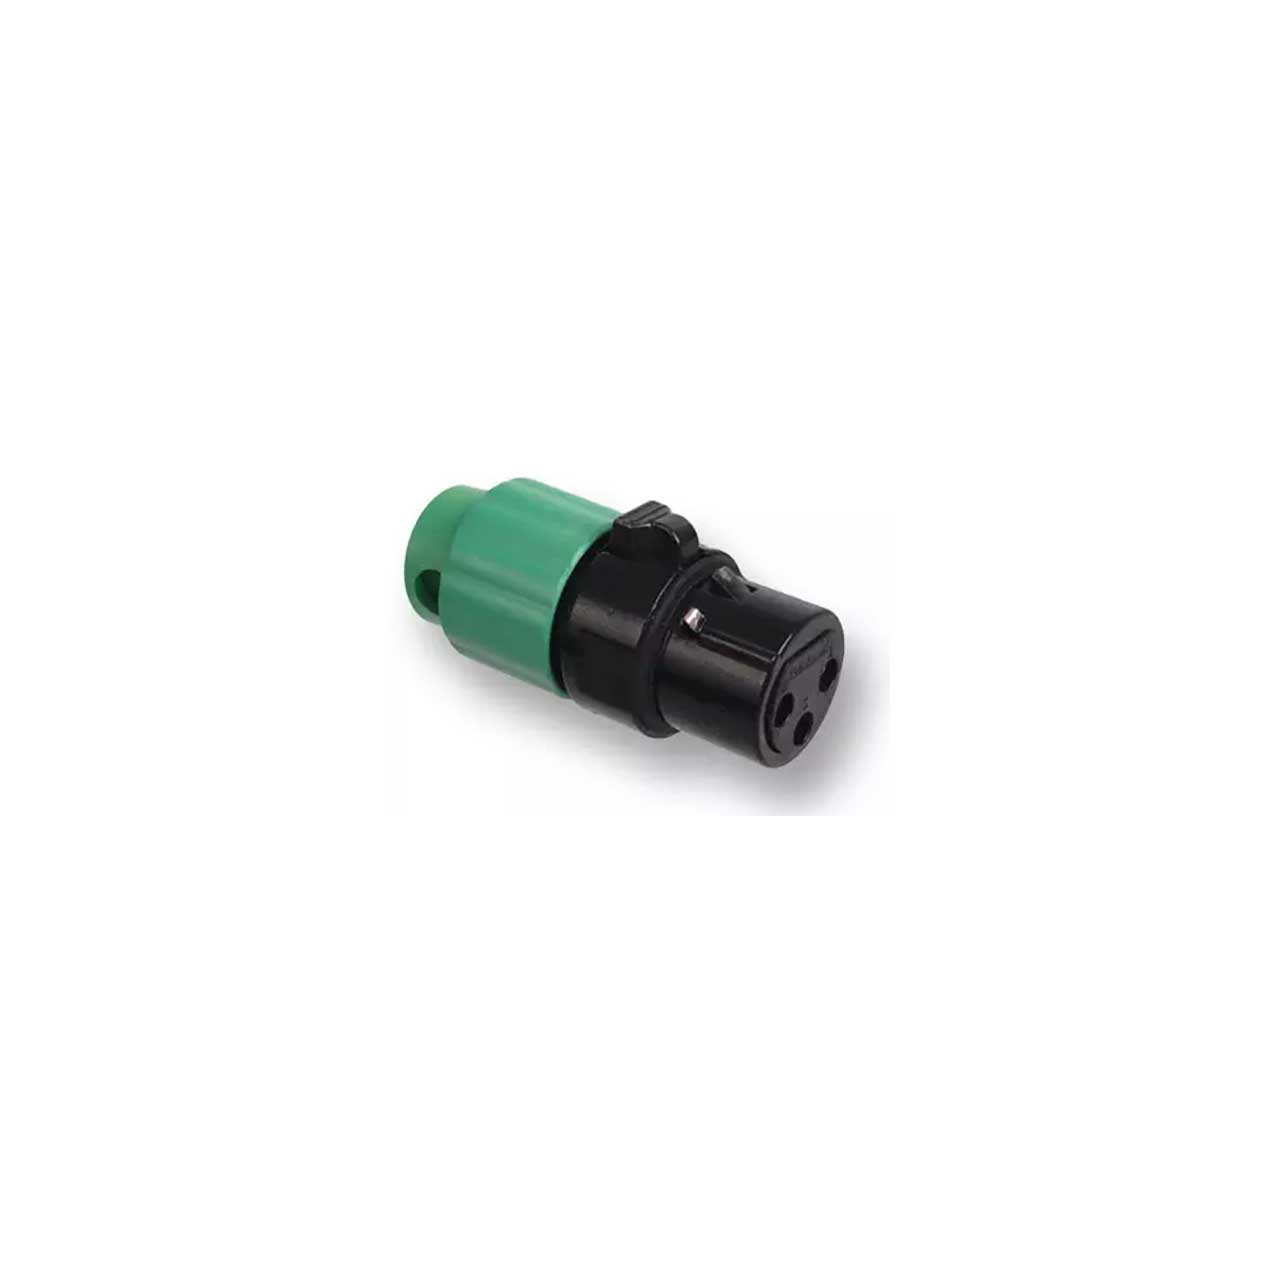 Switchcraft AAA3FBGGLP Low Profile 3 Position Female XLR Connector - Black with Green Back